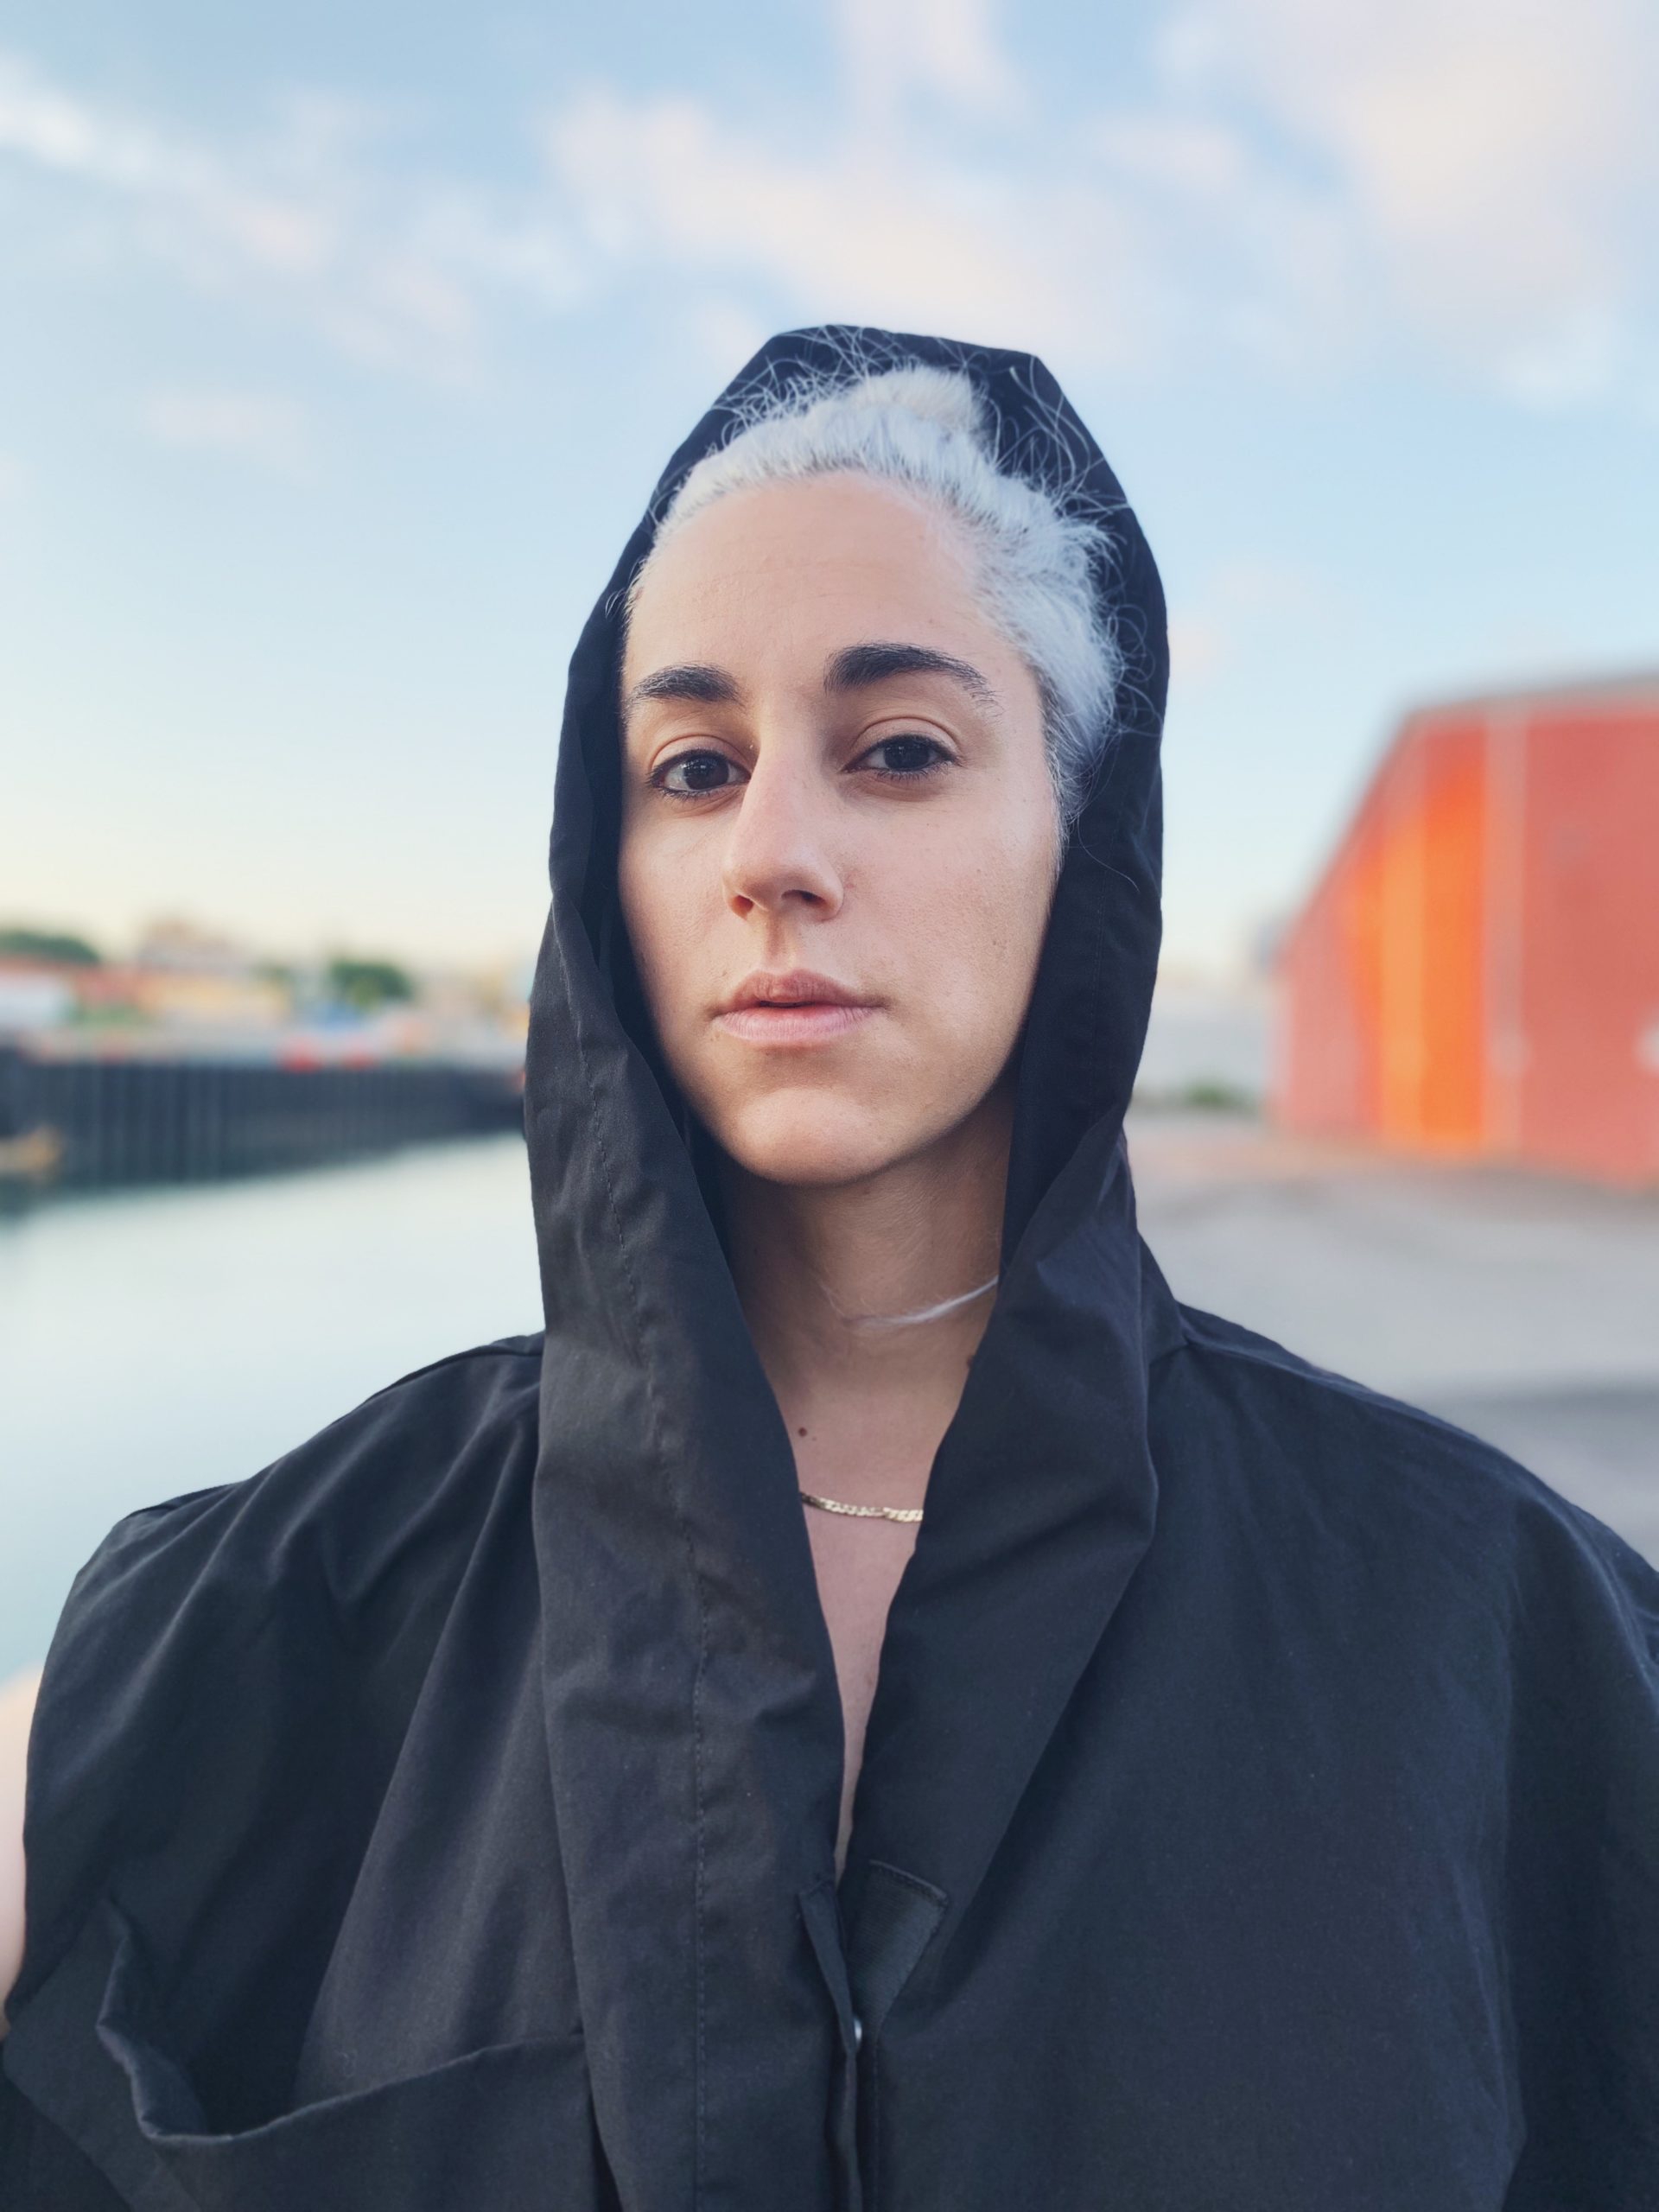 R O N I  shares new single “Stop Motion” & announces debut EP via AudioFemme; ‘Crown’ is due 9/9 on InchPerSecond Records